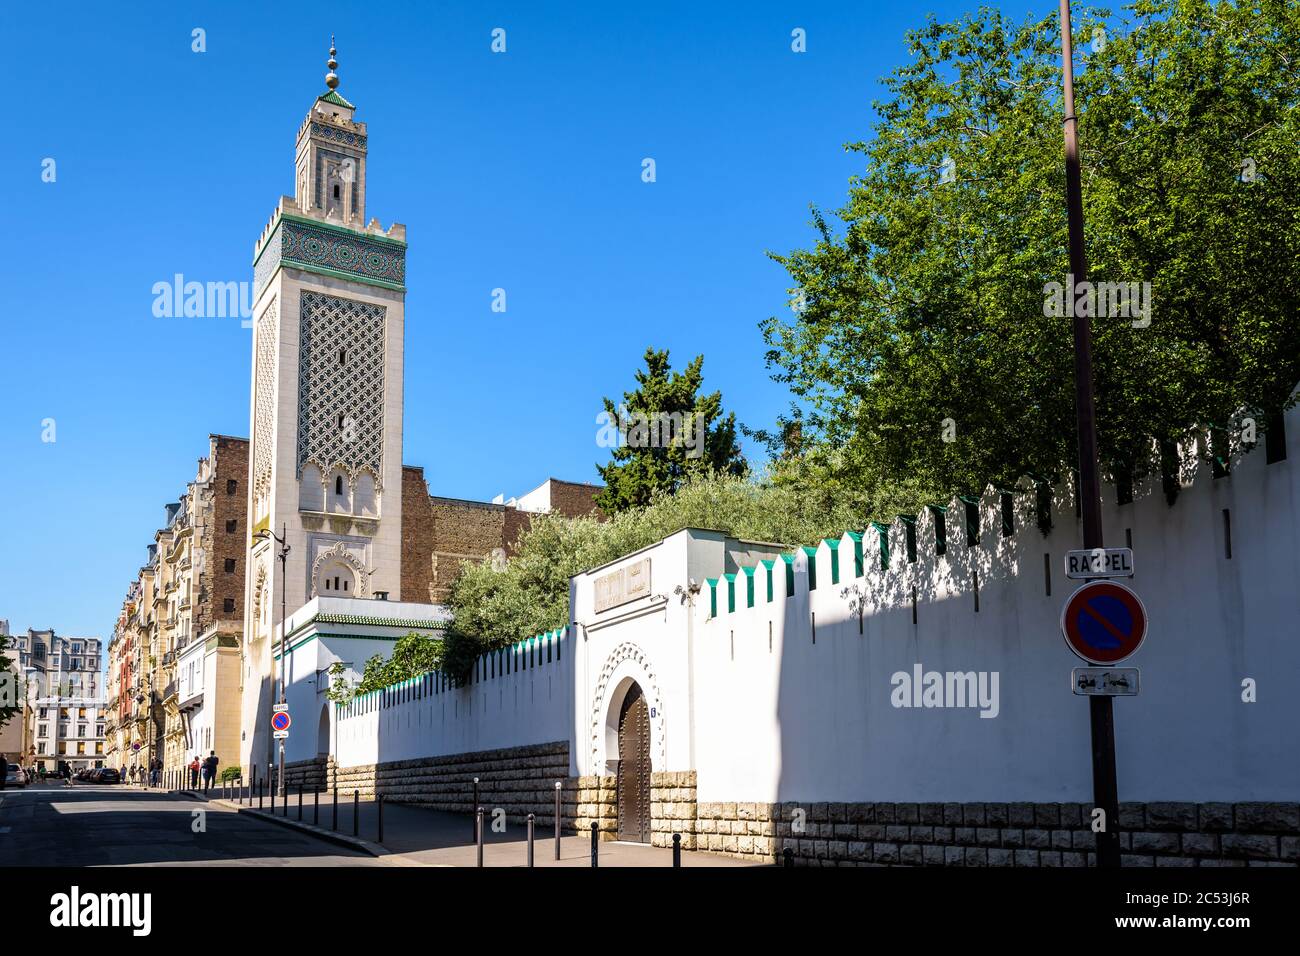 The 33-meter high minaret of the Grand Mosque of Paris and the entrance of the intitute of theology Al-Ghazali in the crenellated surrounding wall. Stock Photo